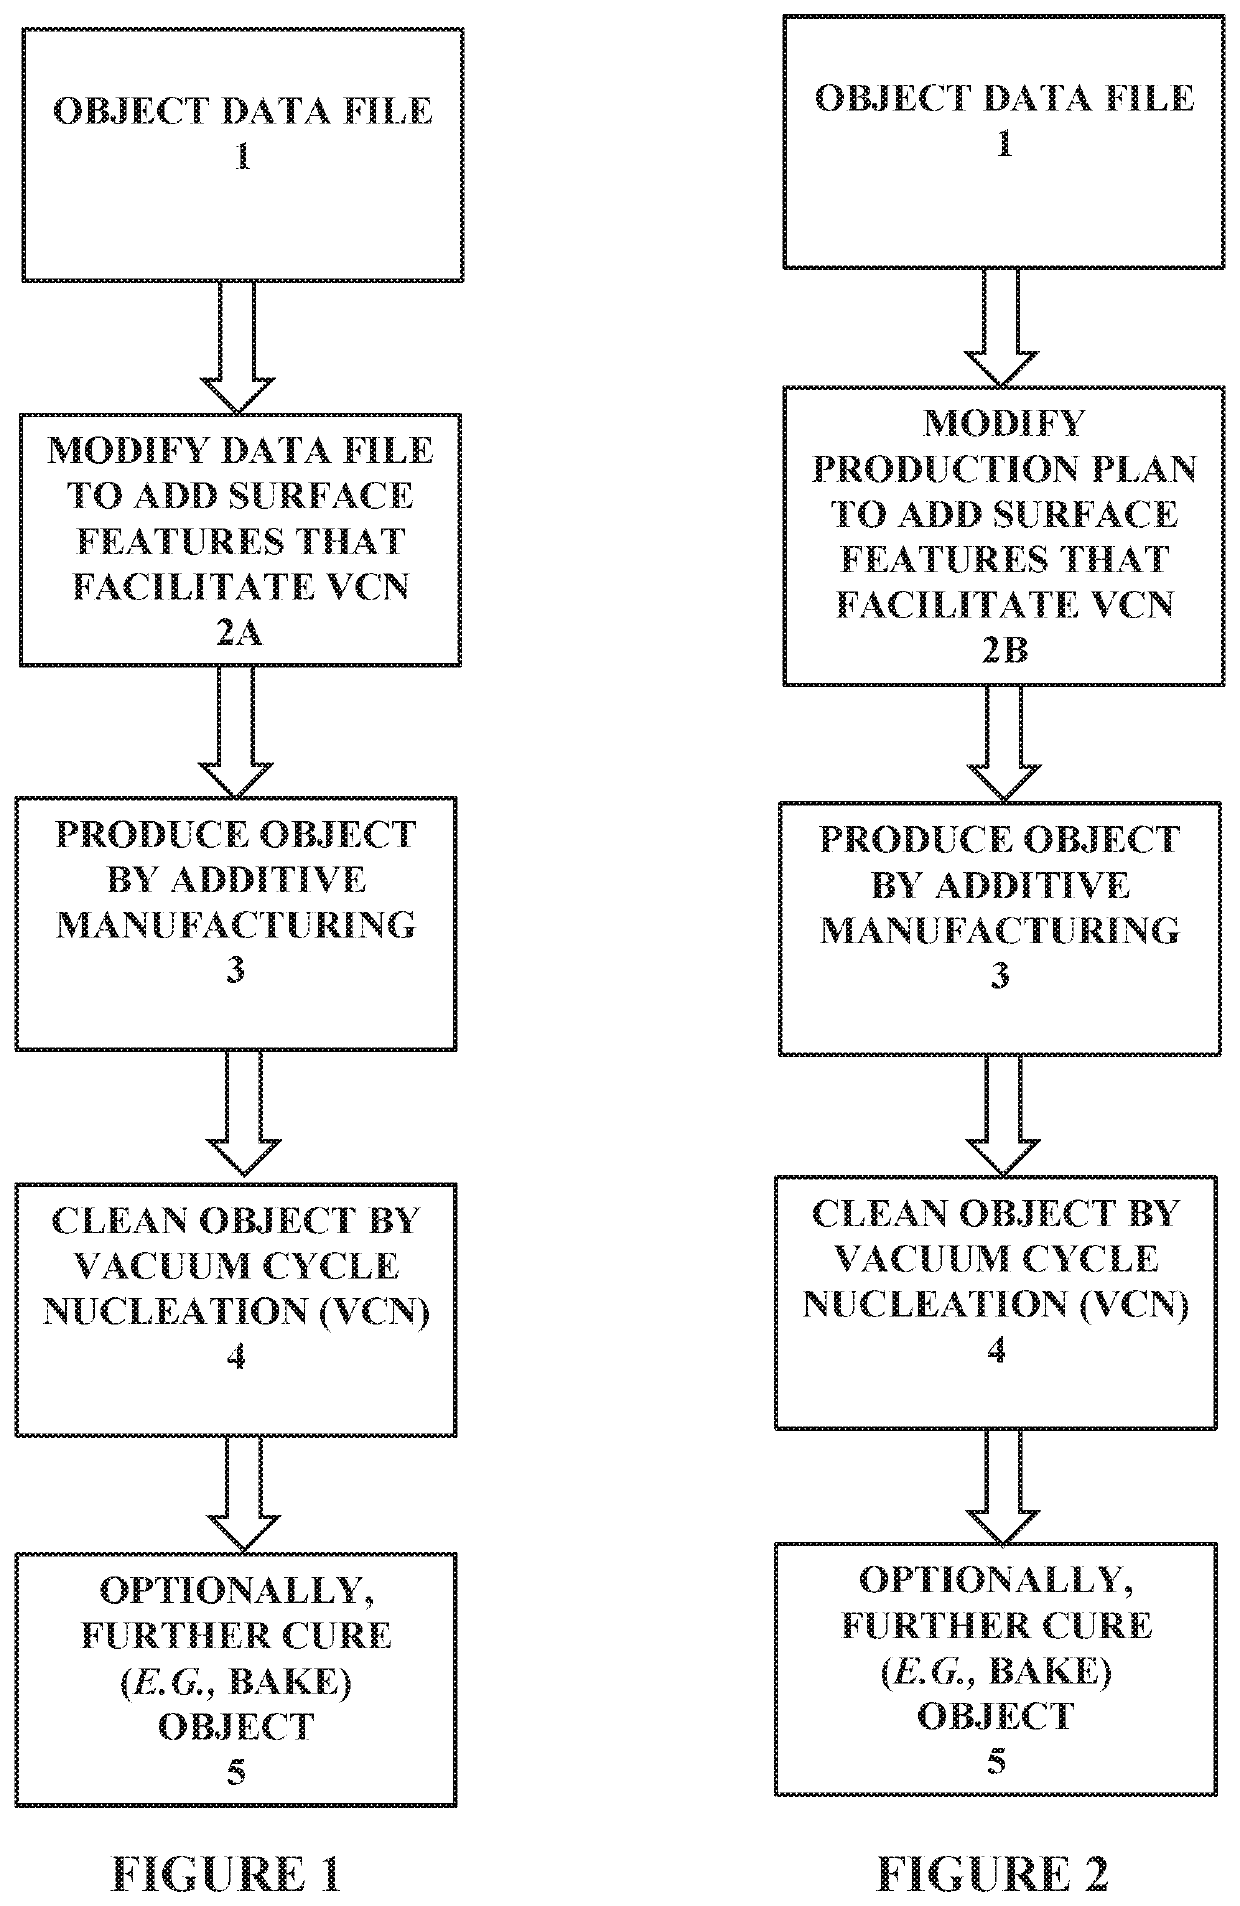 Cleaning of additively manufactured objects by vacuum cycling nucleation